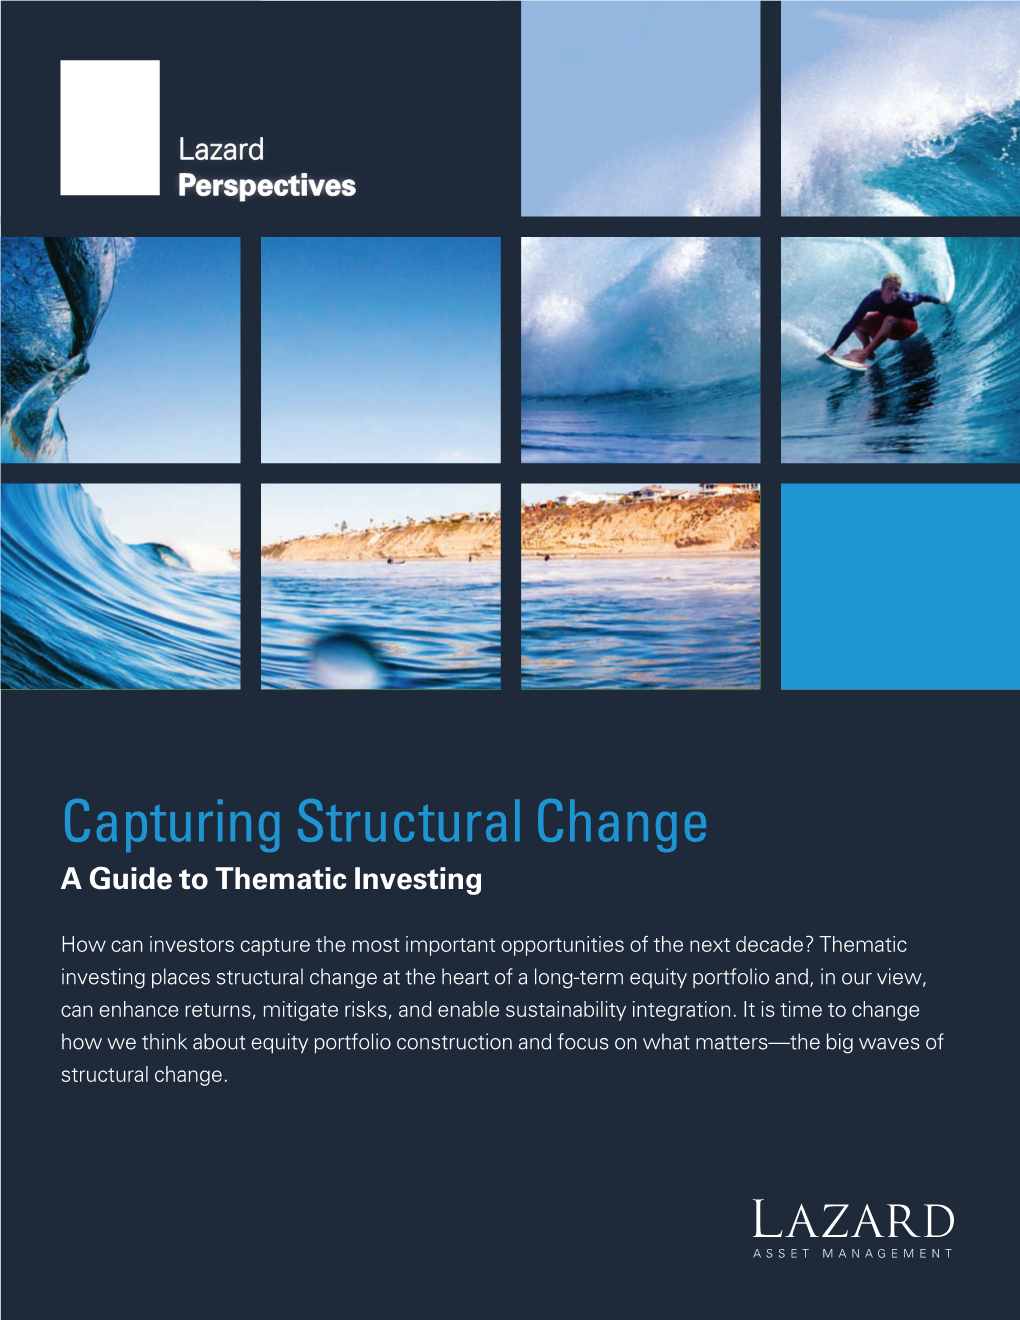 Capturing Structural Change: a Guide to Thematic Investing